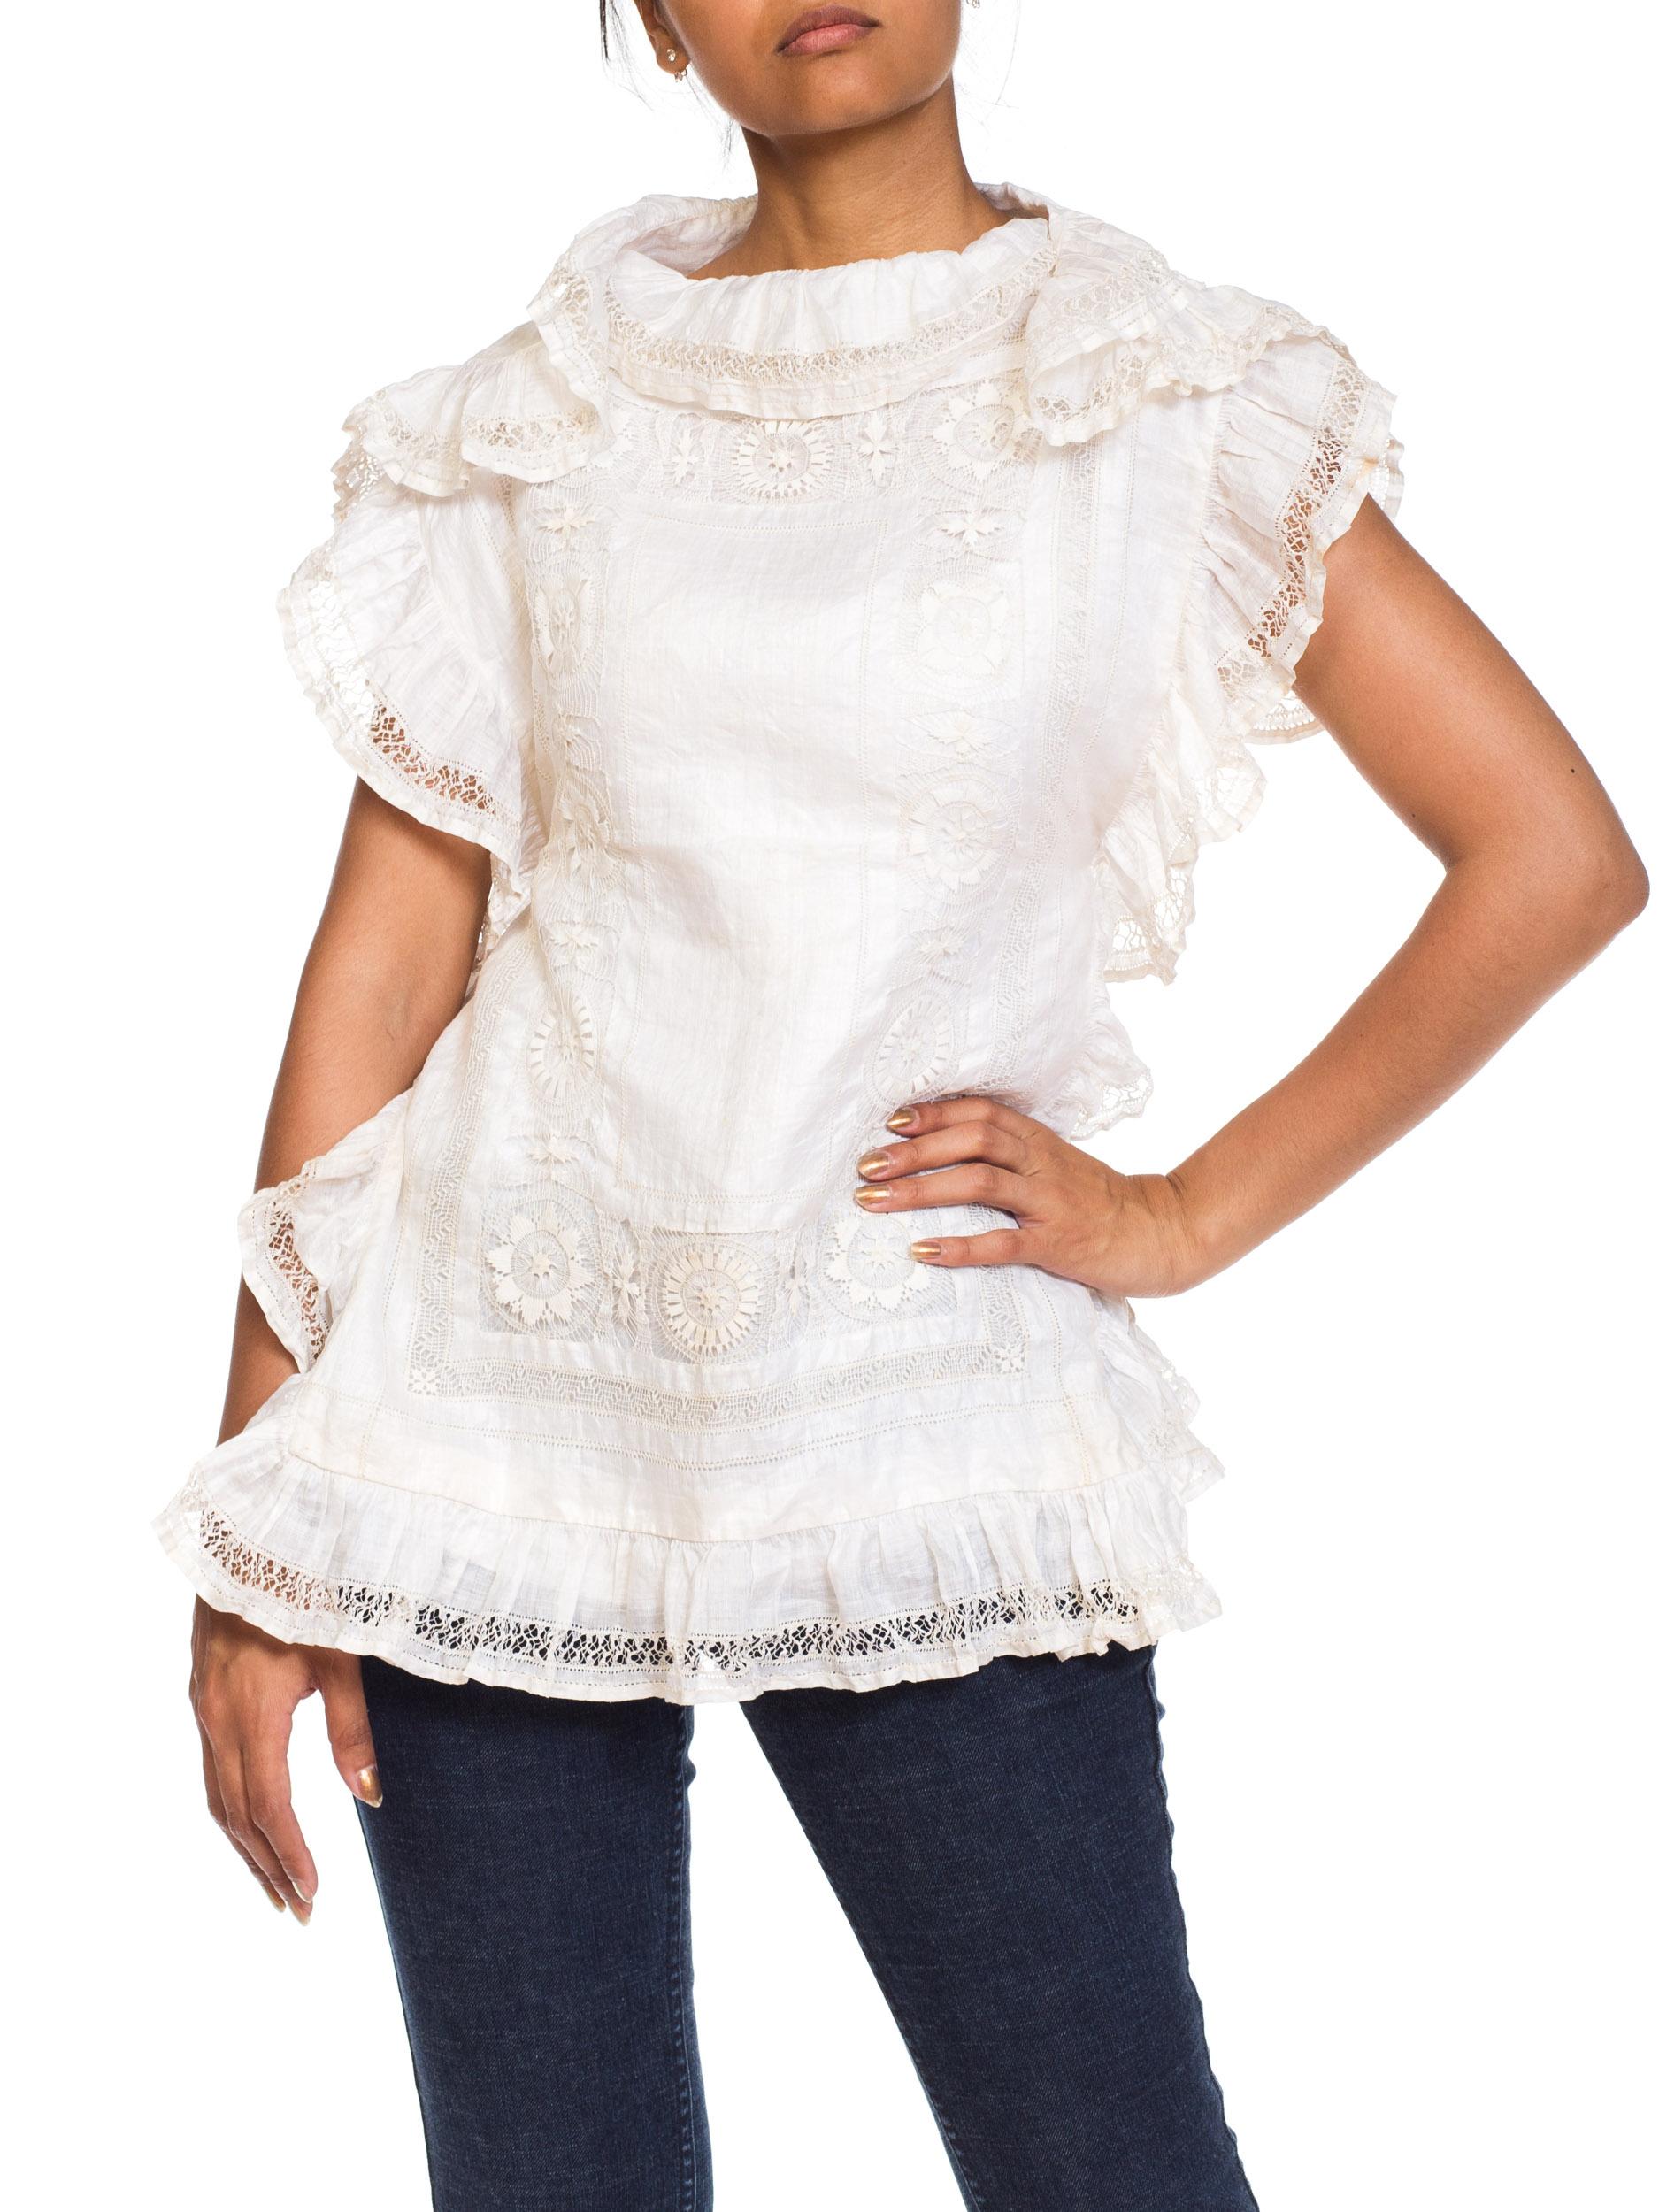 Handmade Lace & Linen Victorian Lace Top 4